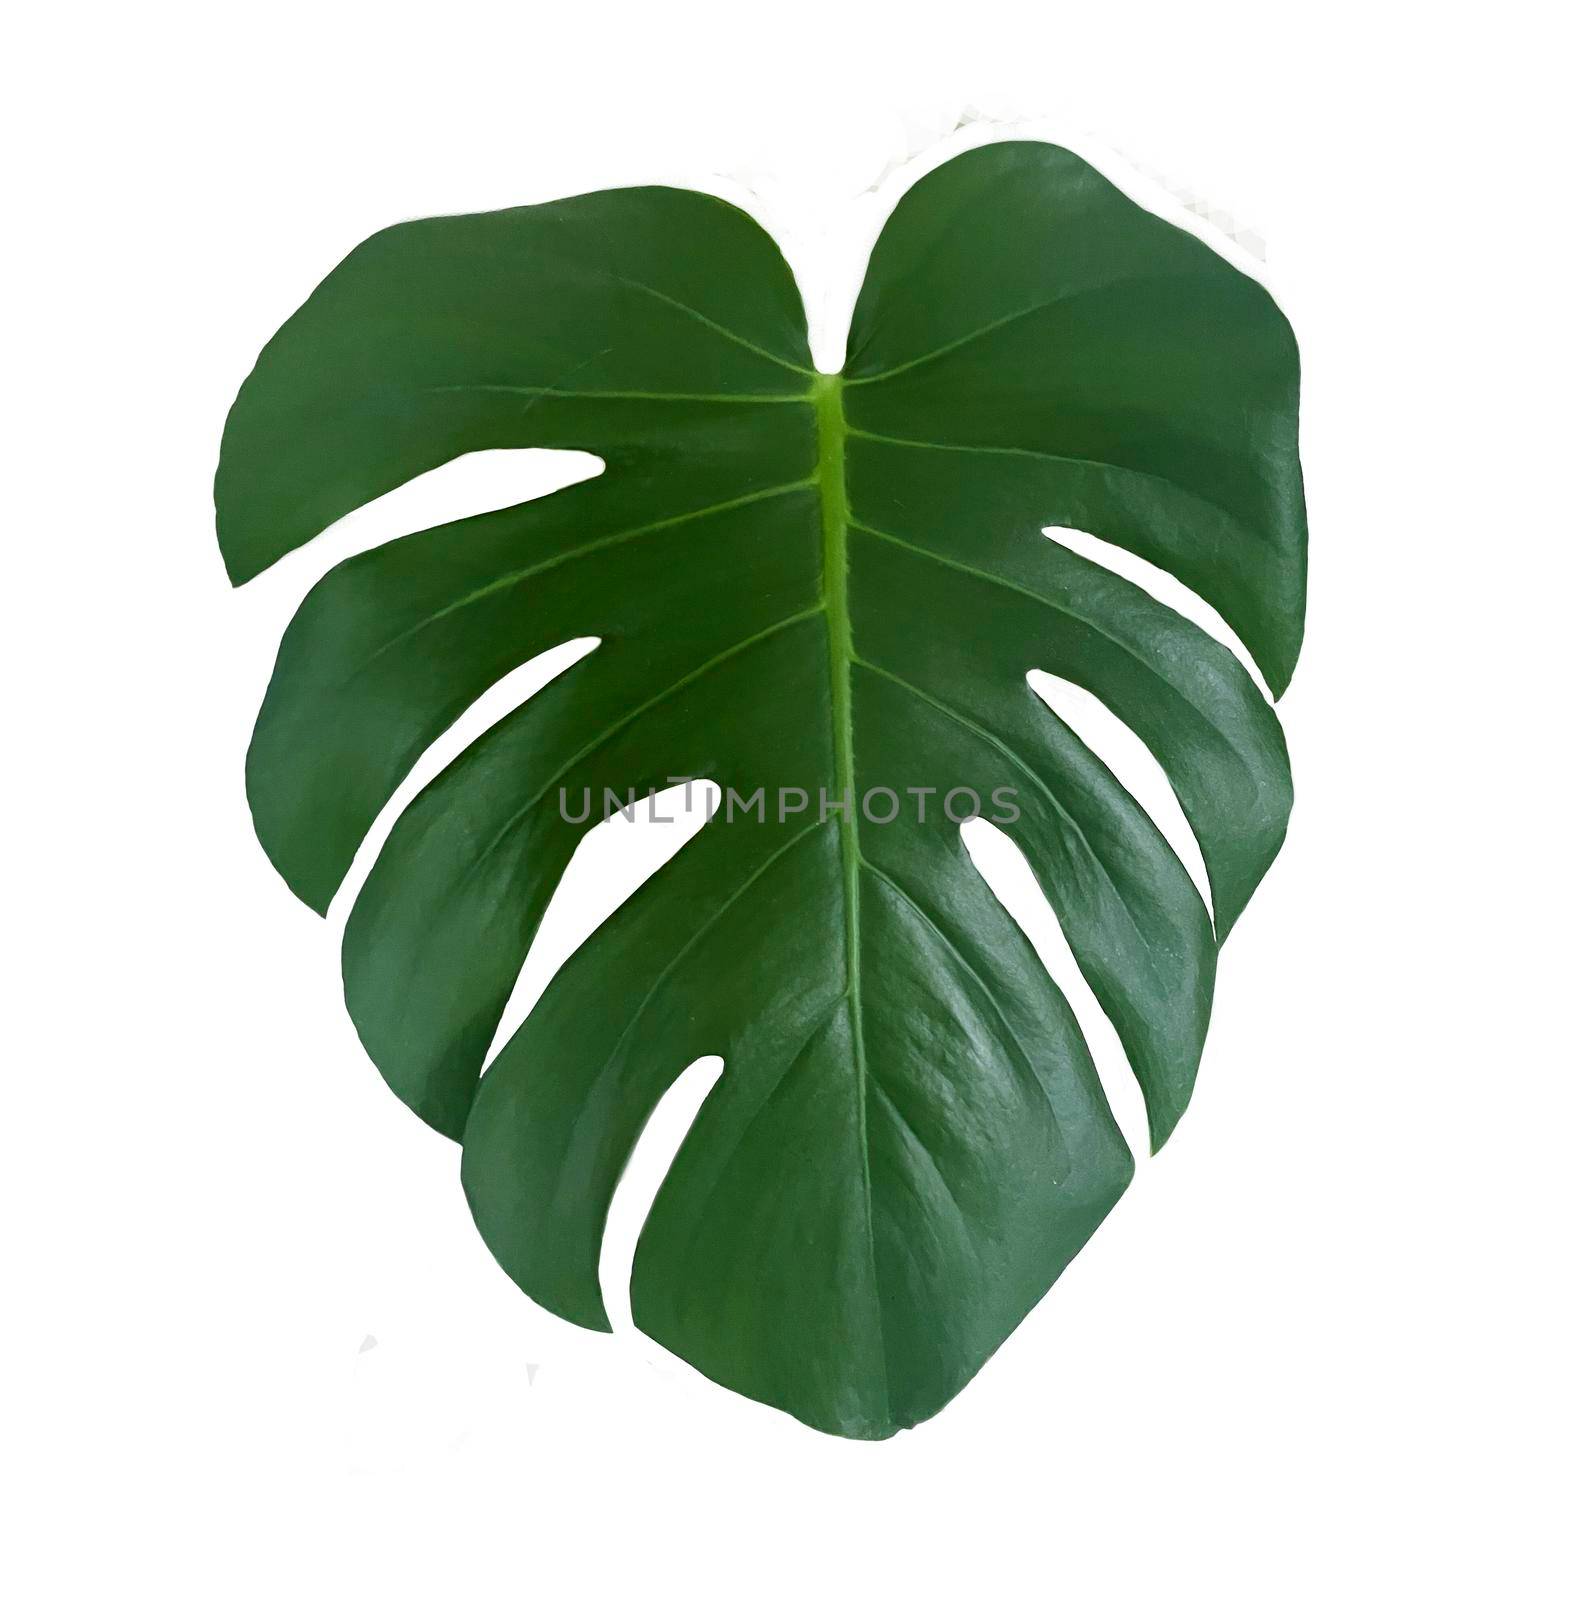 Green Monstera Leaf Isolated on White Background.